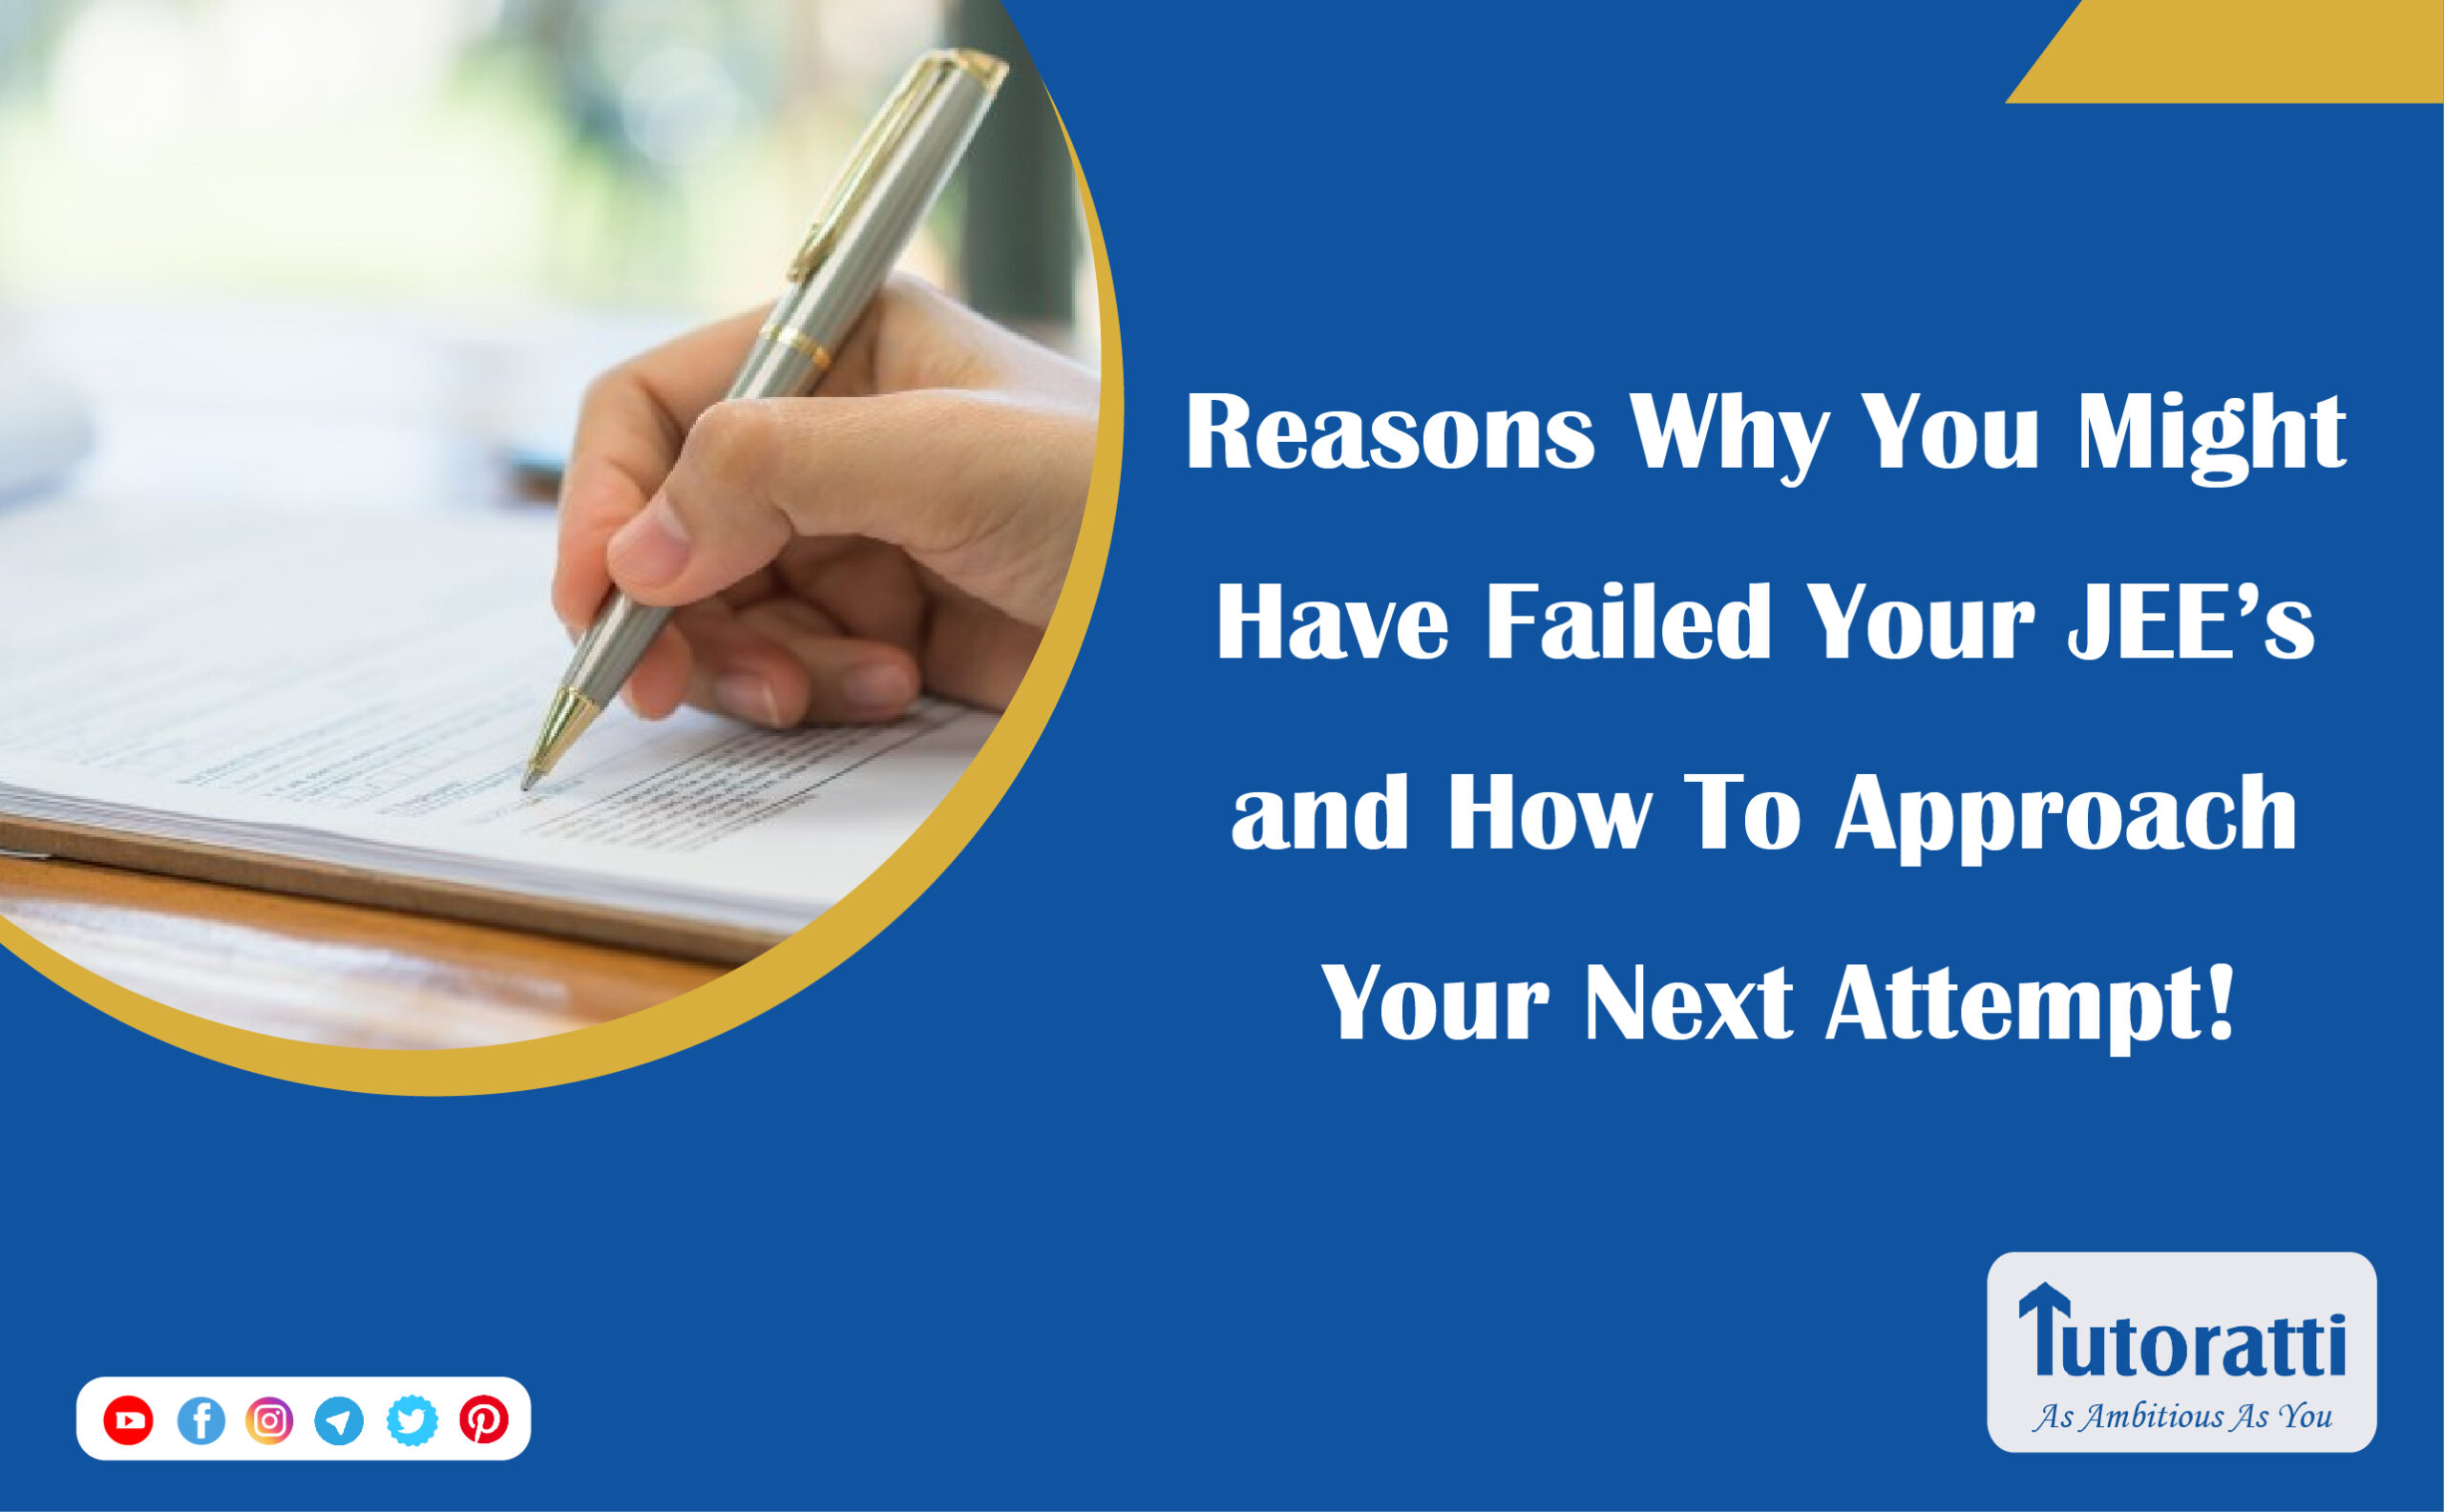 Reasons Why You Might Have Failed Your JEE’s and How To Approach Your Next Attempt!